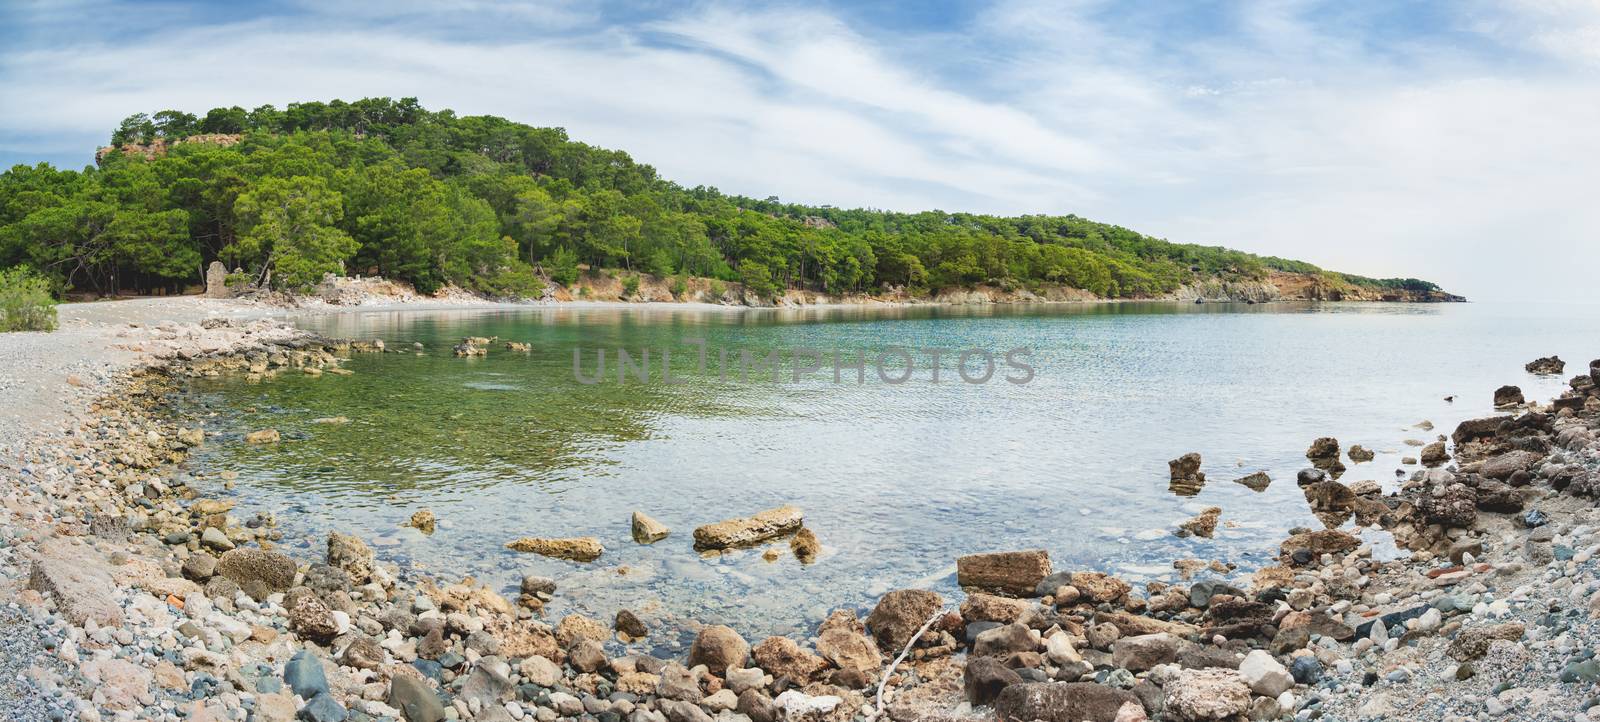 Panorama view of North Harbour of Phaselis. Ruins of Greek city on the coast of ancient Lycia. Architectural landmark near modern town Tekirova in the Kemer district of Antalya Province in Turkey.